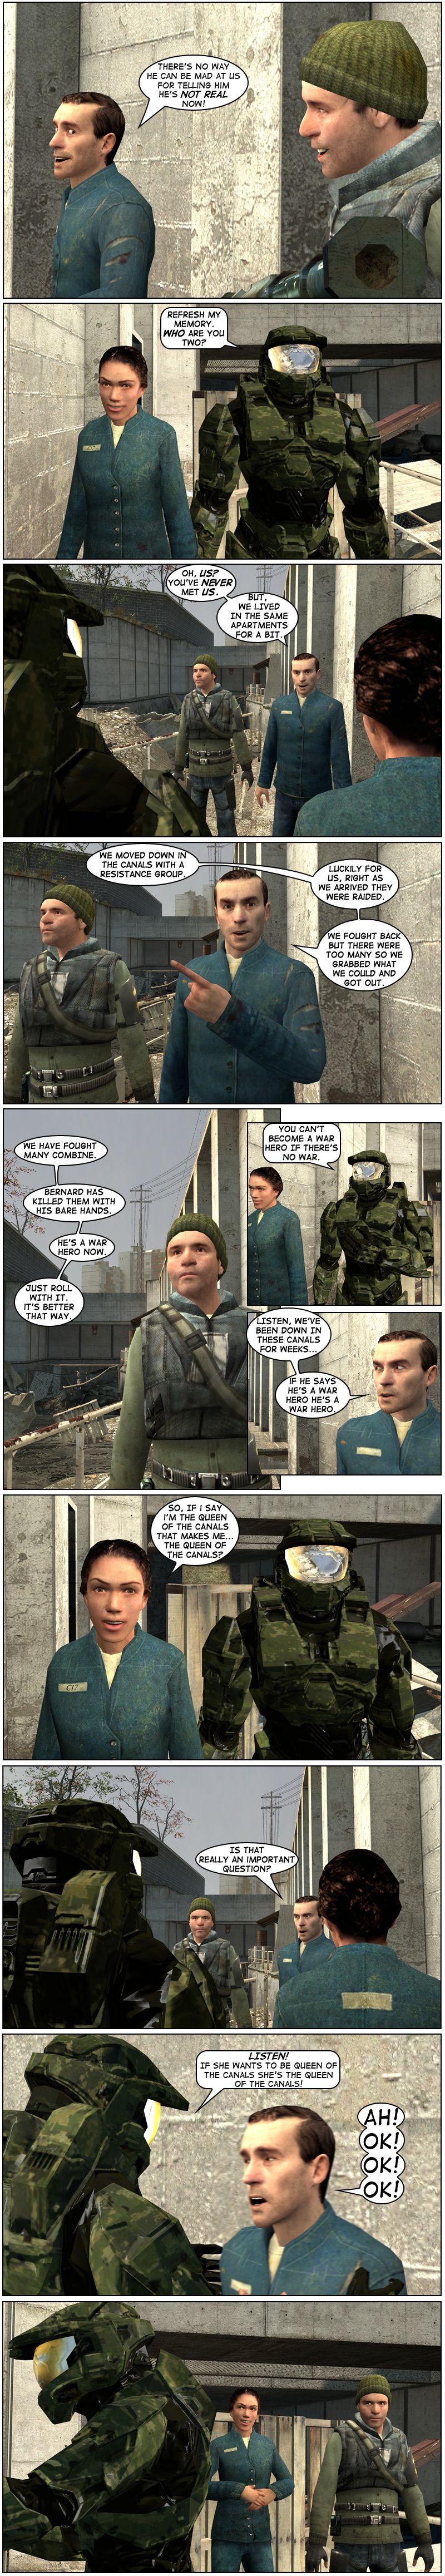 Salvatore tells Bernard there's no way Master Chief can be mad at them for telling him he's not real now. Master Chief and Amy approach and Chief asks that they refresh his memory, inquiring who the two of them are. Salvatore quickly says he's never met them but they lived in the same apartments for a bit. Salvatore explains they moved down in the canals with a Resistance group and, luckily for them, just as Salvatore and Bernard arrived, the group was raided. Salvatore says they fought back but there were too many so they grabbed what they could and got out. Bernard strikes a pose as Salvatore explains they have fought many Combine and Bernard has killed them with his bare hands, calling him a war hero. Master Chief points out you can't become a war hero without a war. Salvatore says they've been down in these canals for weeks and if Bernard says he's a war hero, he's a war hero. Amy asks if she says she's the queen of the canals, does that make her the queen of the canals. Salvatore asks if that really is an important question, to which Master Chief grabs him and shoves him against the wall repeatedly, telling him if Amy wants to be queen of the canals she's the queen of the canals. Salvatore screams okay repeatedly. Amy and Bernard watch this silently as it happens.